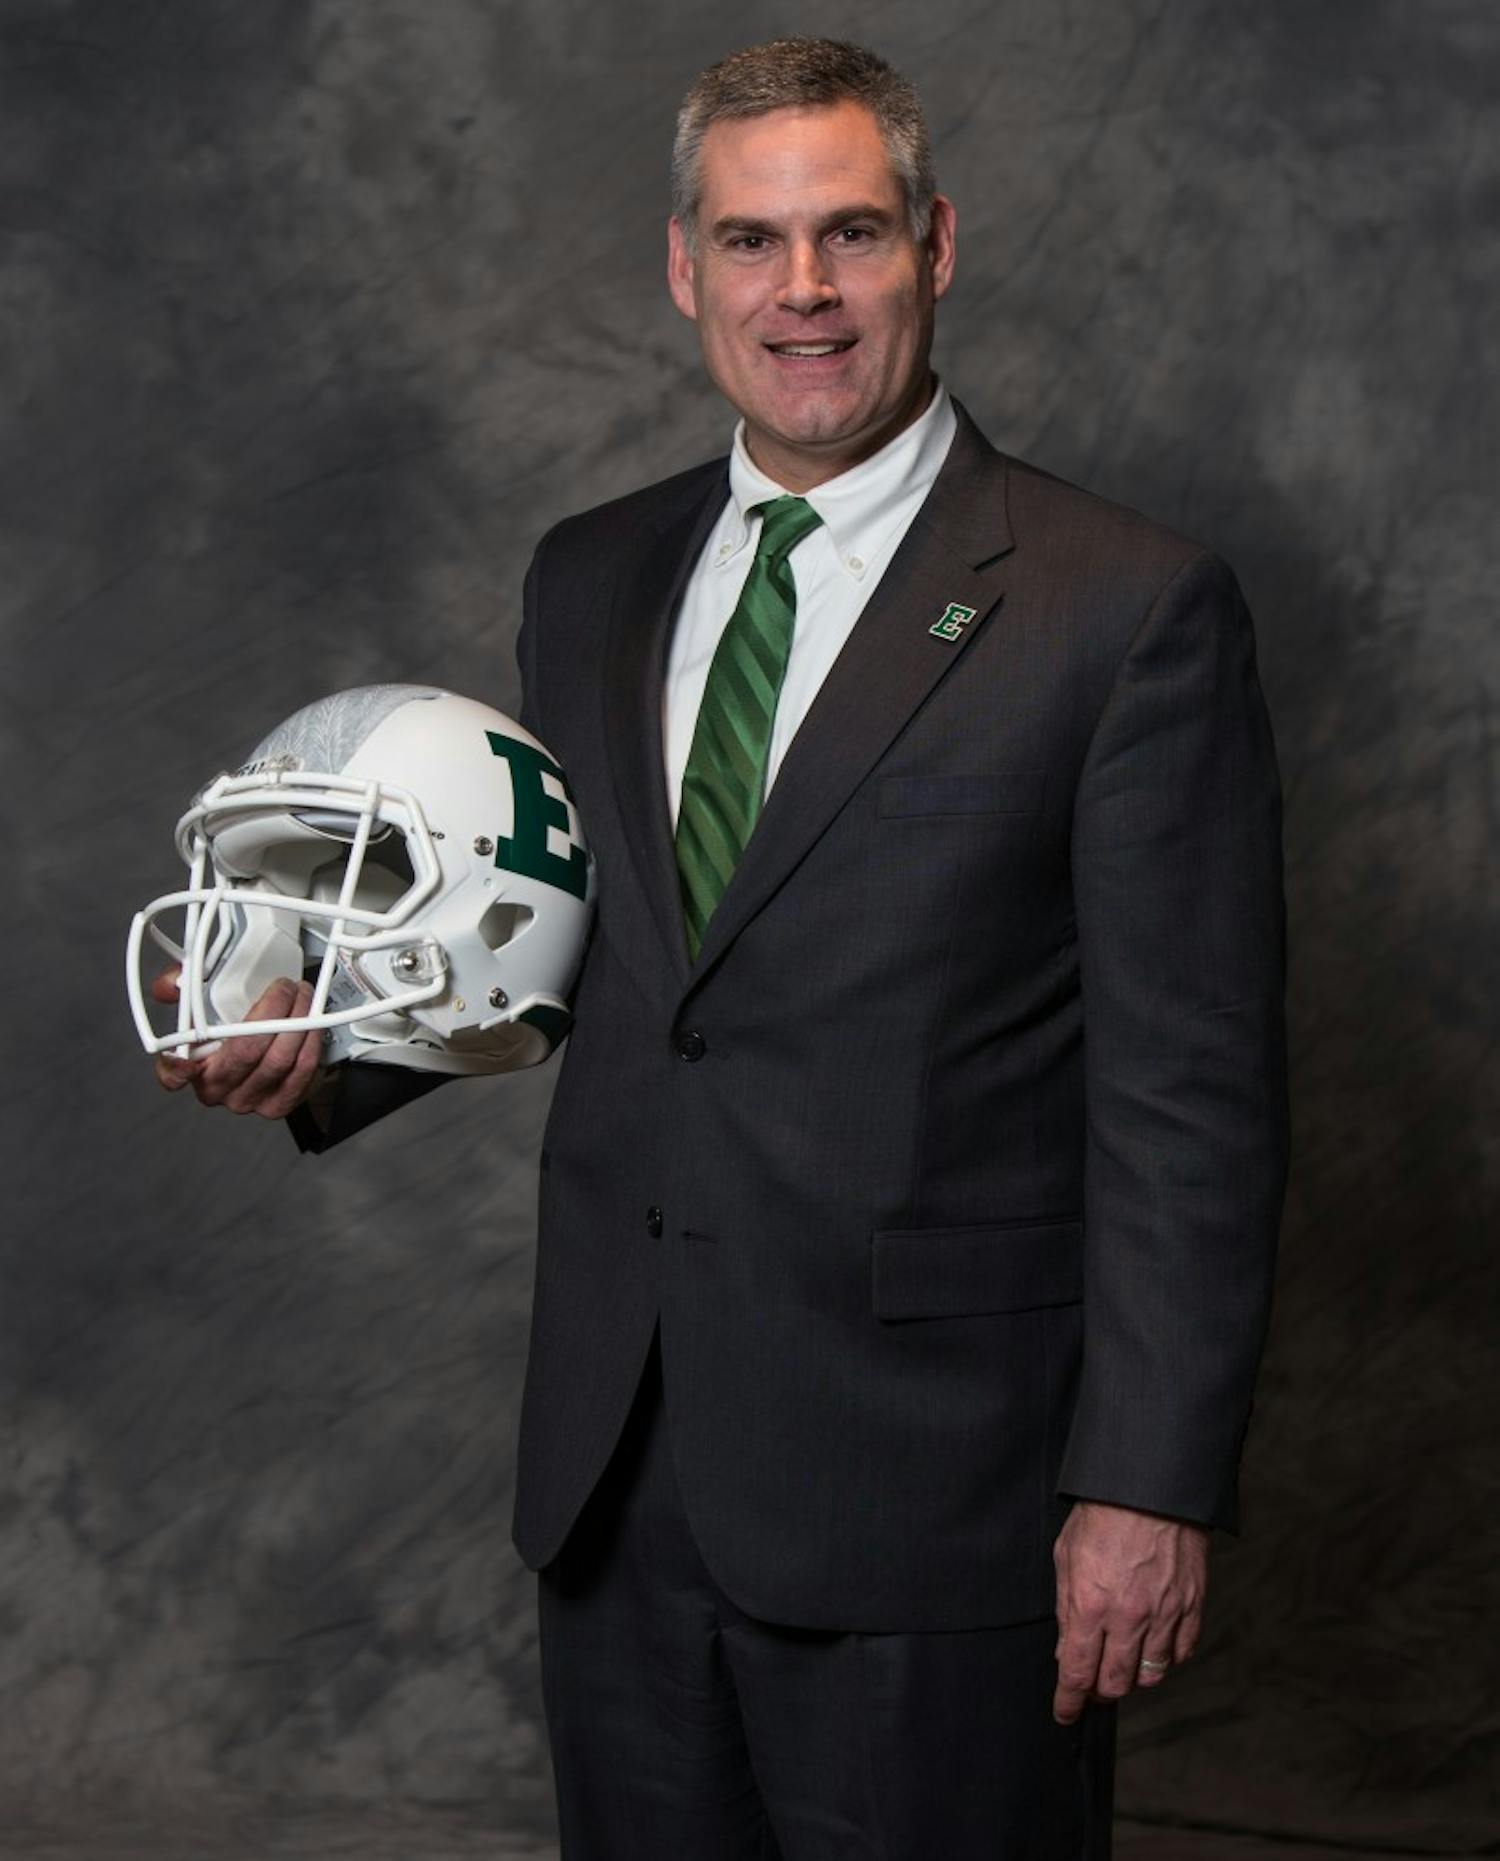 	Creighton graduated from Kenyon College in 1991 with his bachelor&#8217;s degree and received his master&#8217;s degree in 1993 from Concordia University Chicago while at the same time taking on duties as offensive coordinator for their football team.